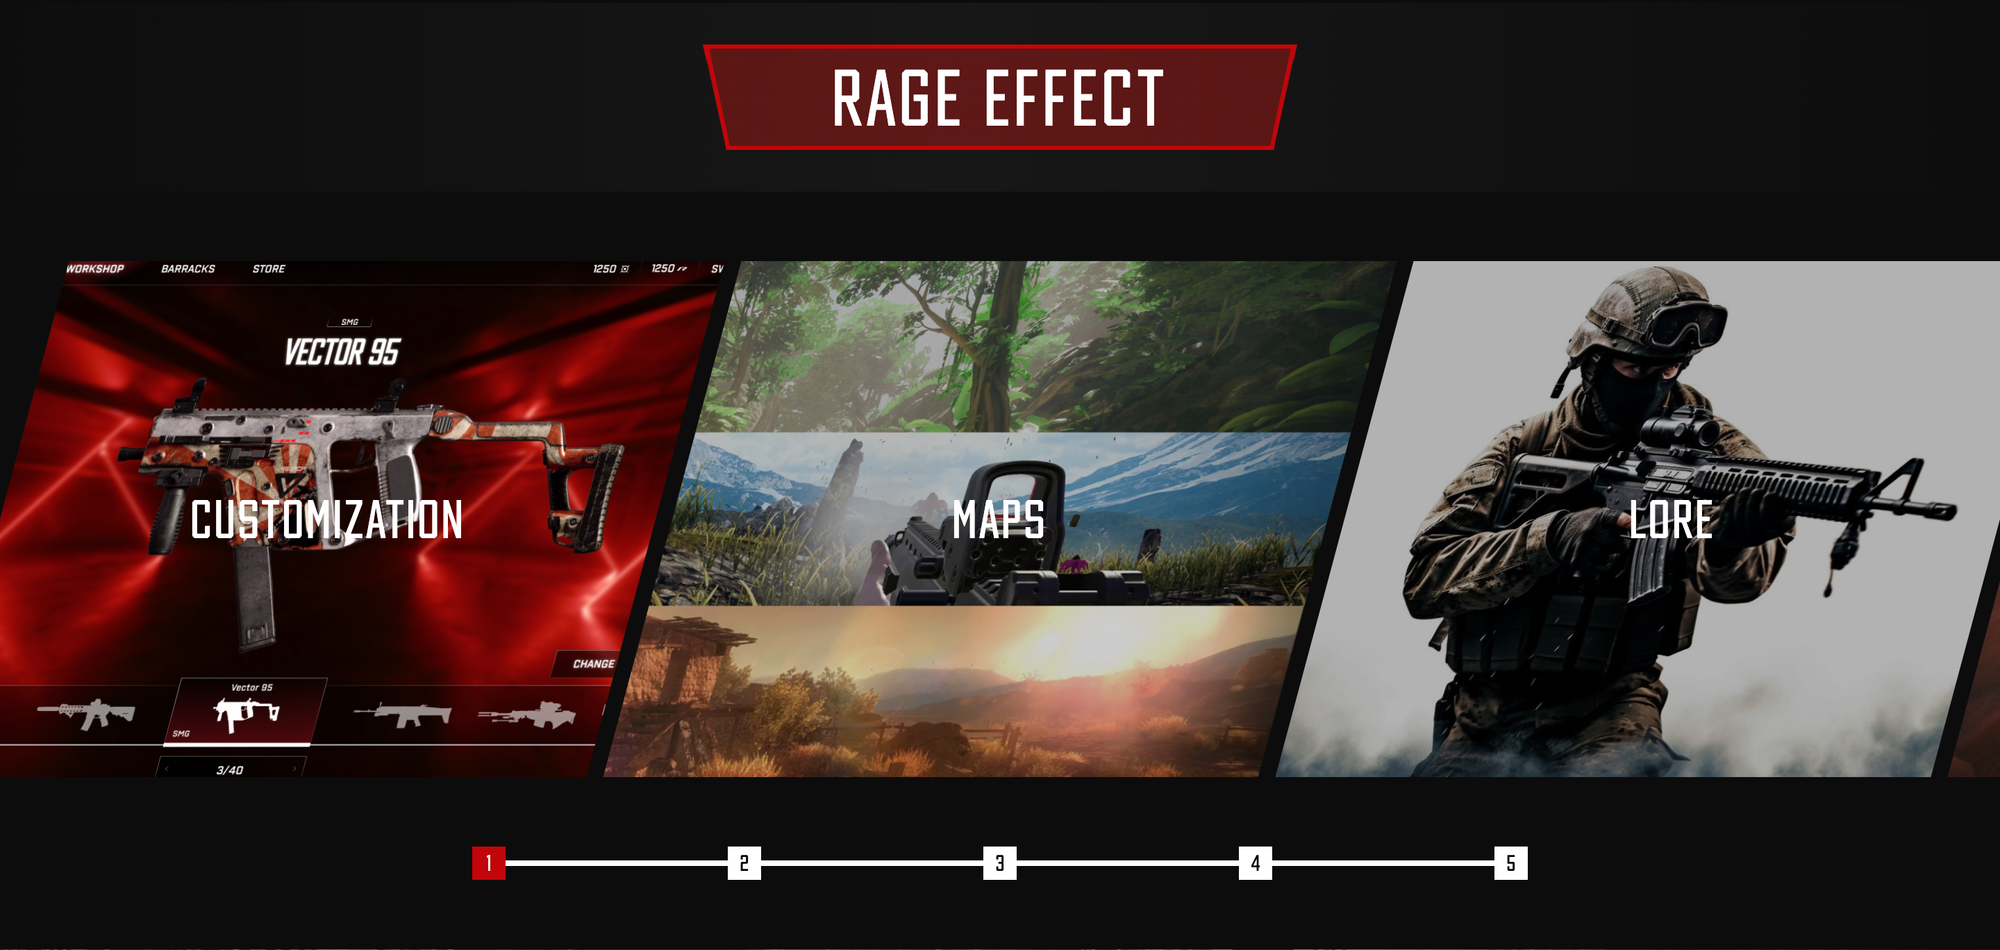 Elevating the Gaming Experience with MirrorWorld - The Rage Effect Story